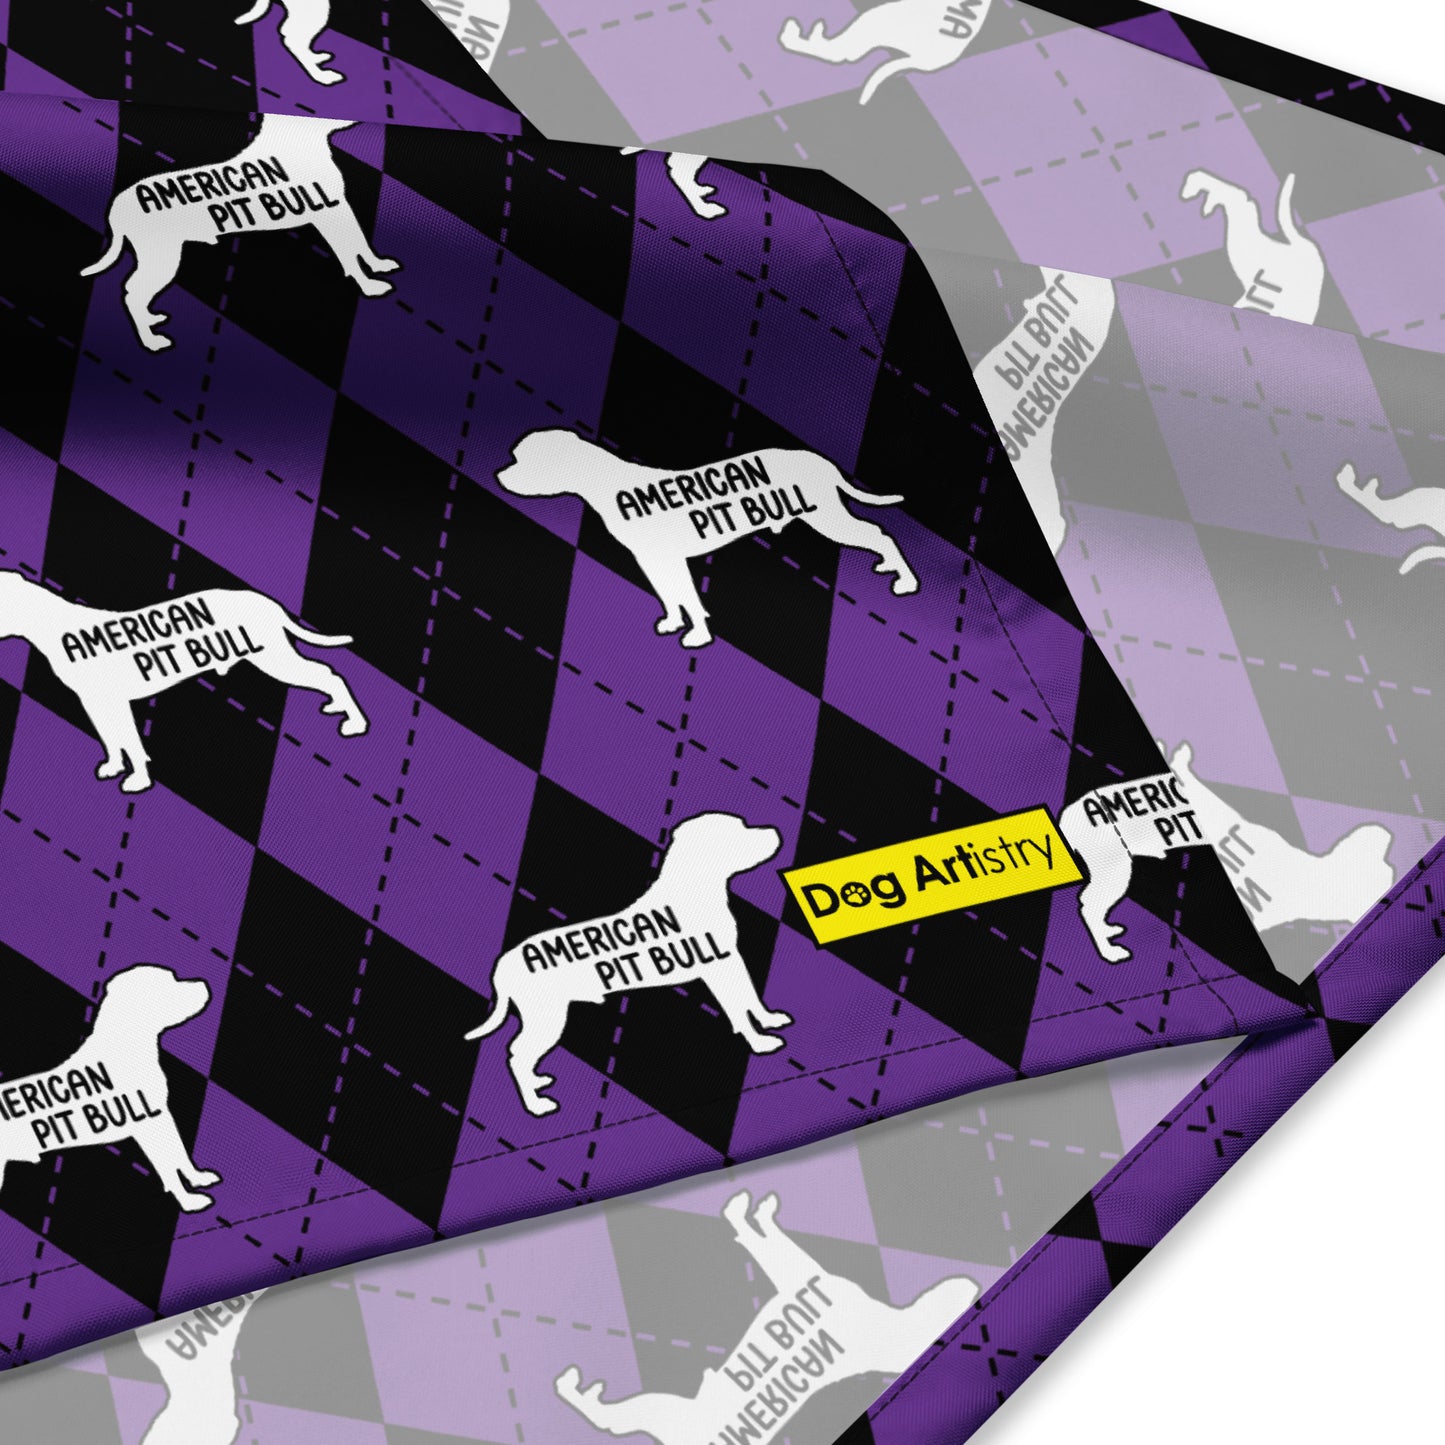 American Pit Bull Purple Argyle All-Over Print Bandana by Dog Artistry